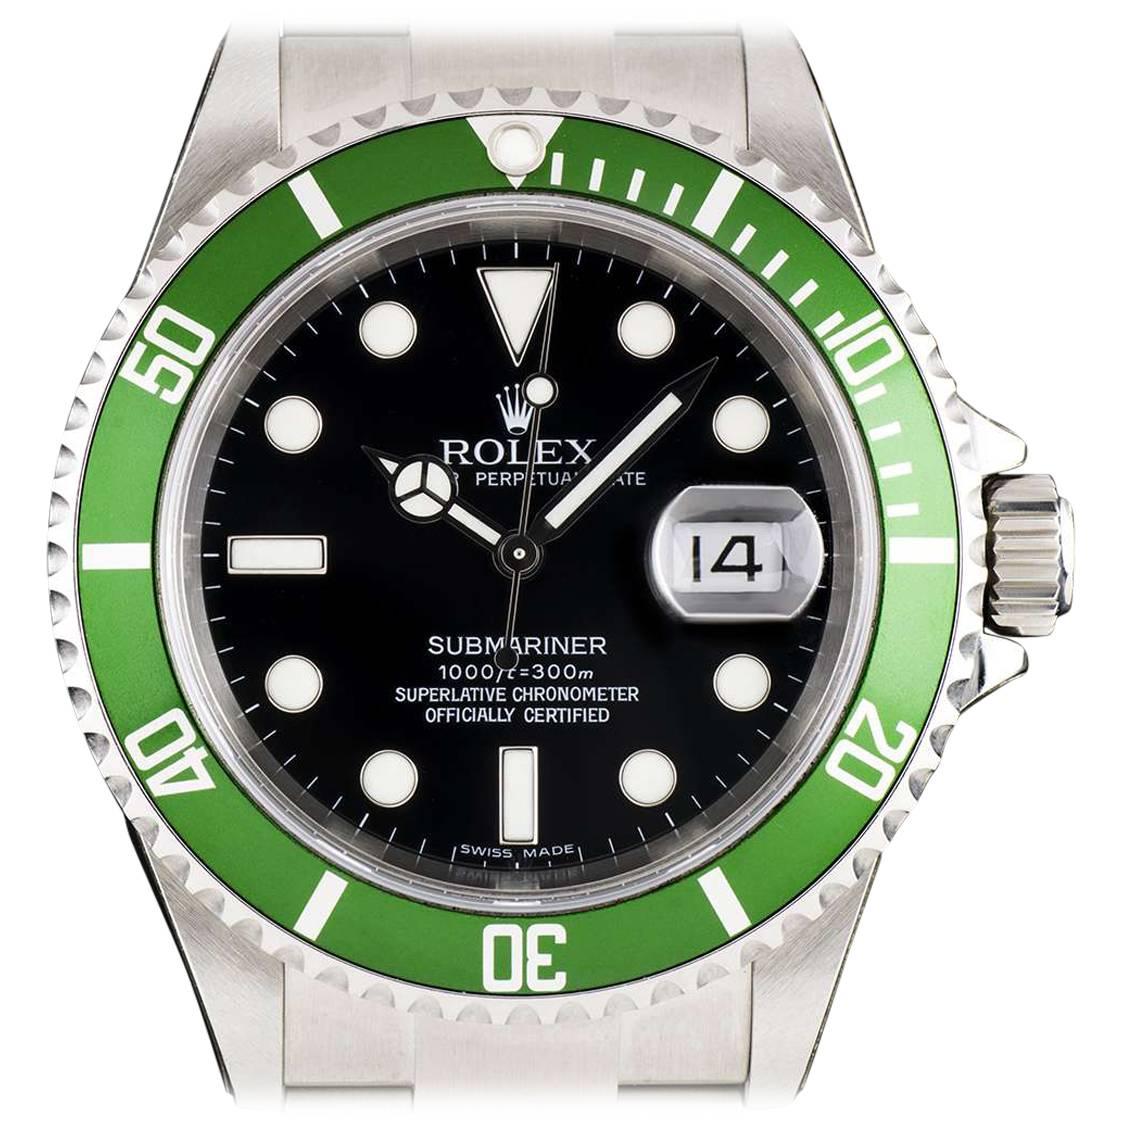 Rolex Stainless Steel Submariner Date Black Dial Green Bezel Automatic Watch